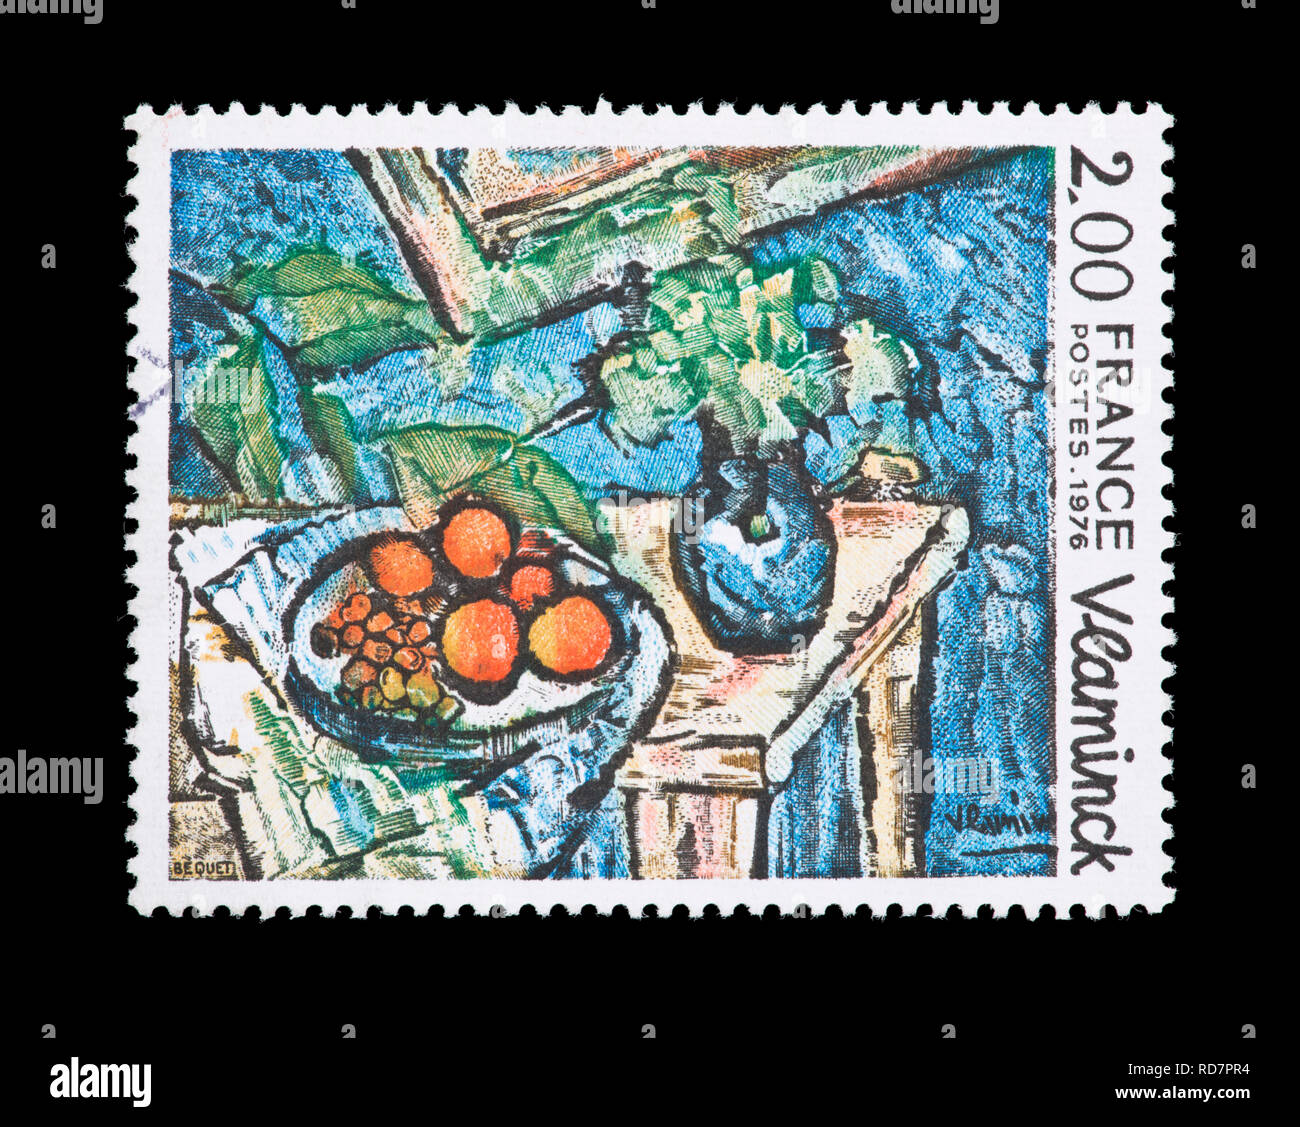 Postage stamp from France depicting the Maurice de Vlaminck painting Still Life Stock Photo